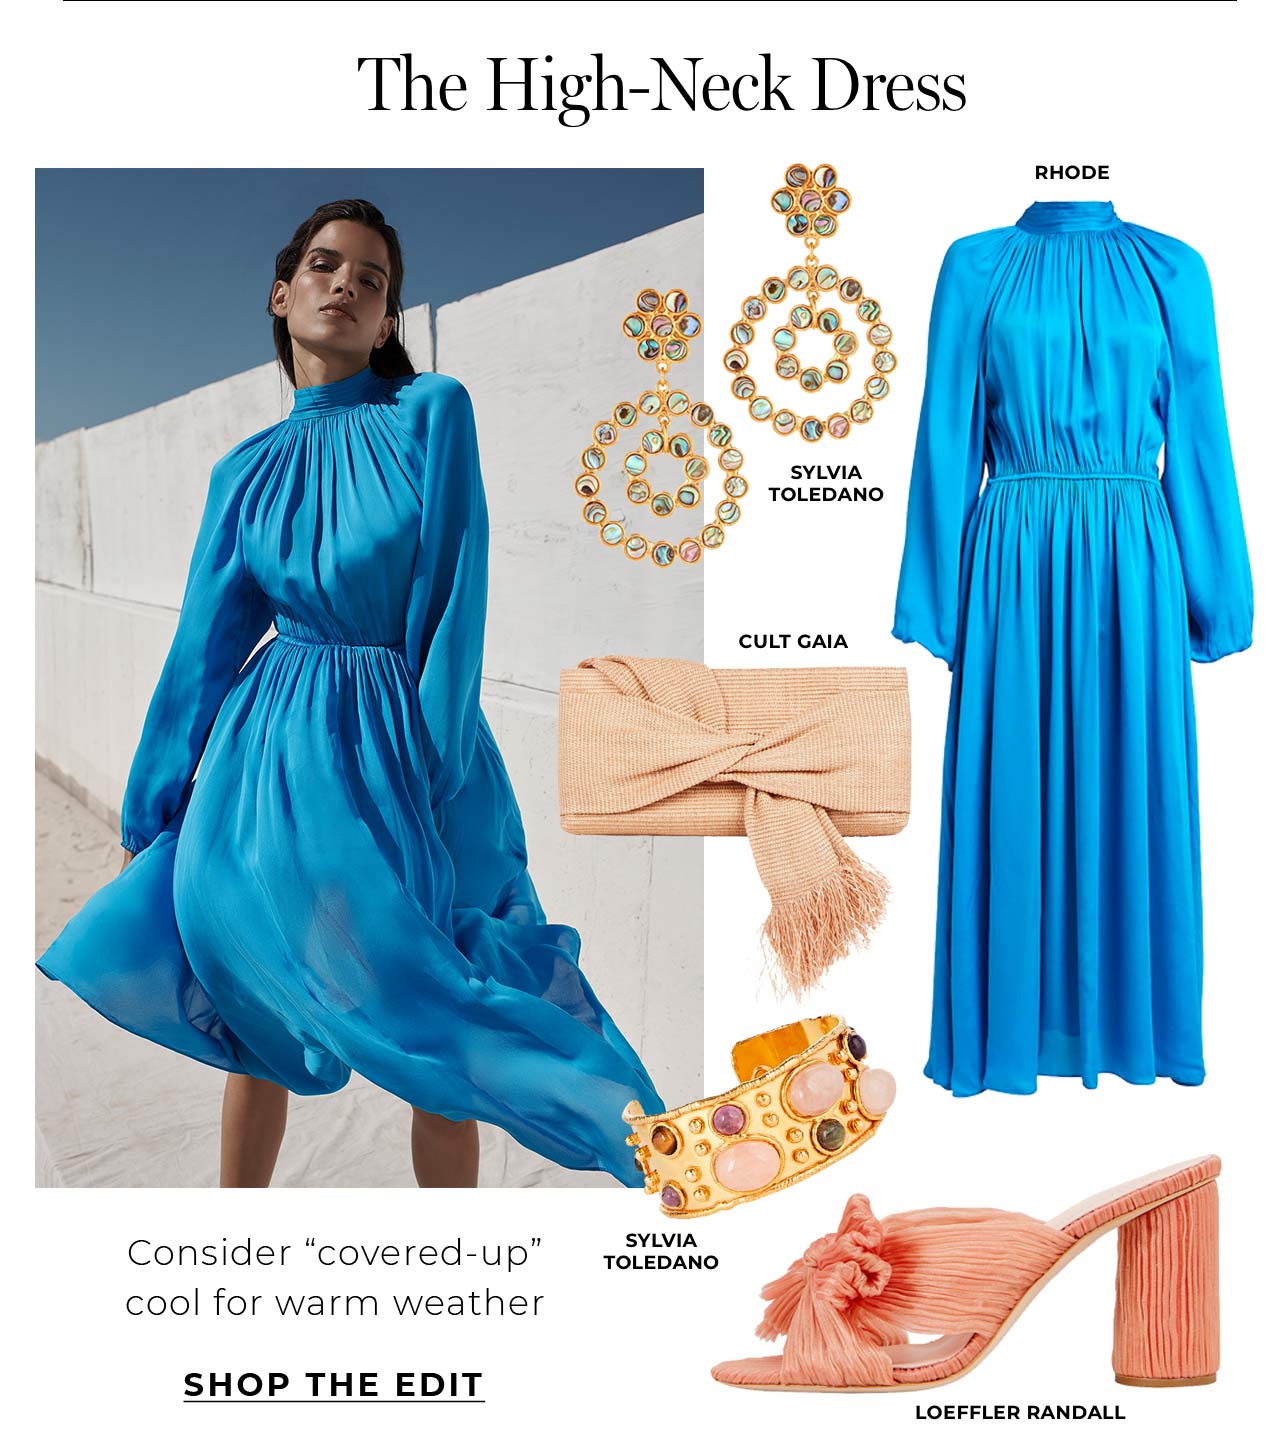 Consider a covered-up dress cool for warm weather